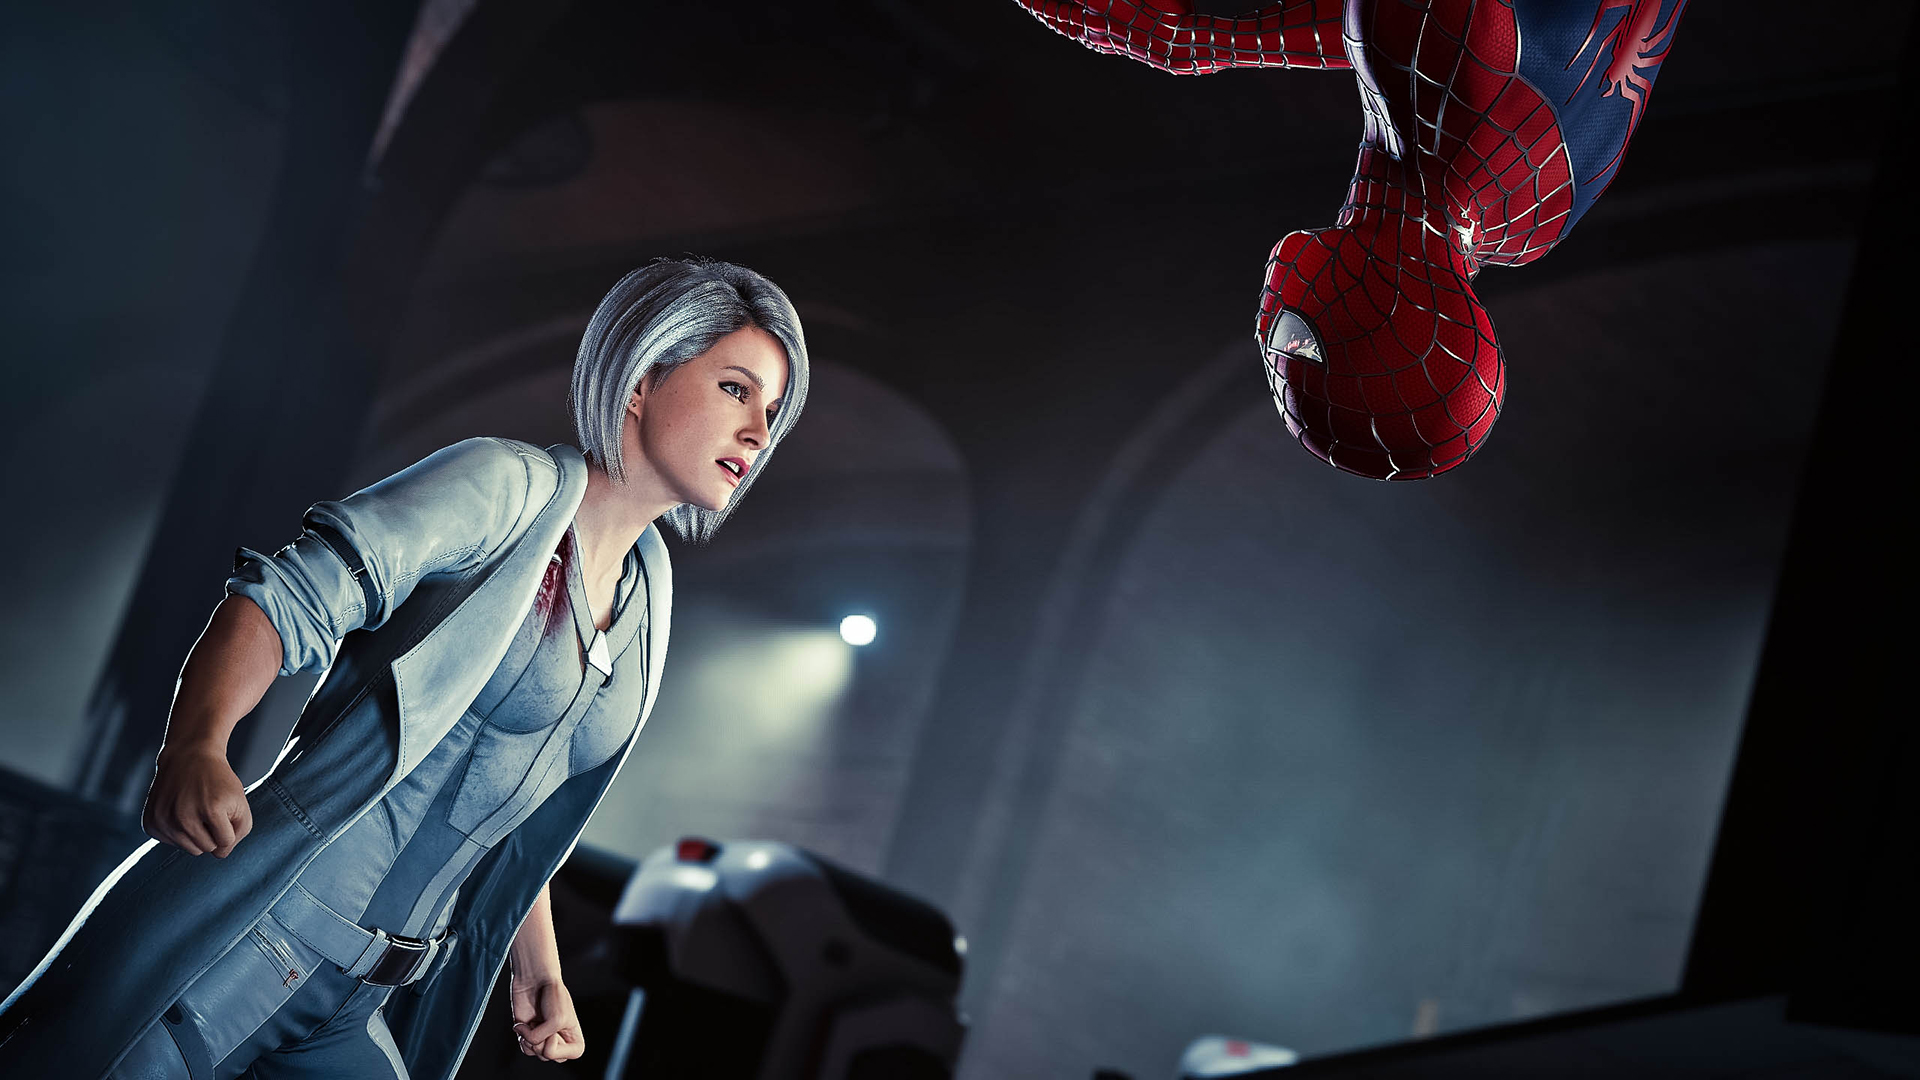 Spider Man 2018 Spider Man Silver Sable Video Games Superhero Video Game Girls Video Game Characters 1920x1080